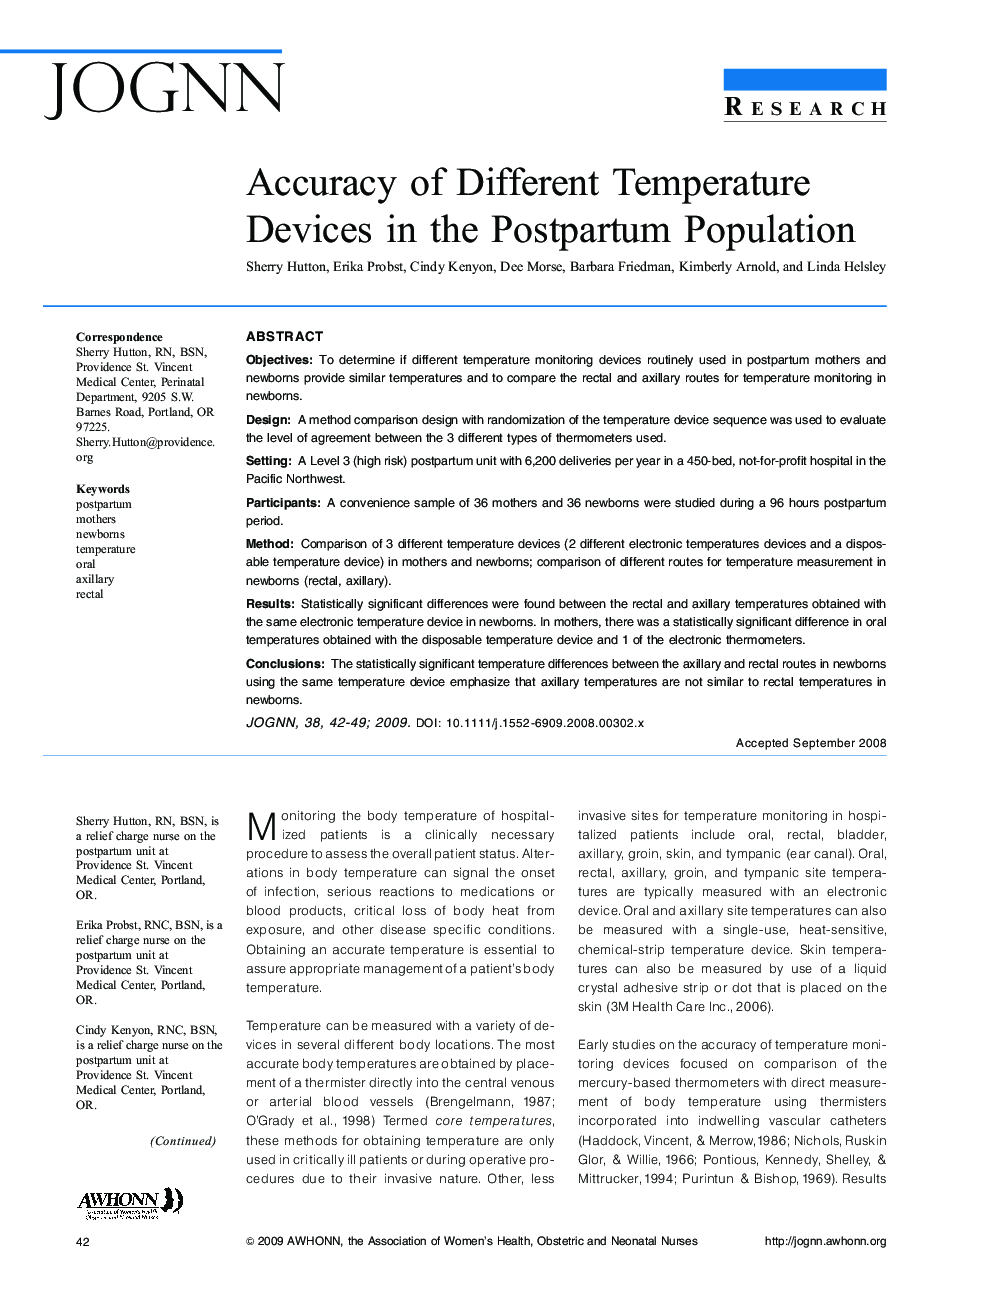 Accuracy of Different Temperature Devices in the Postpartum Population